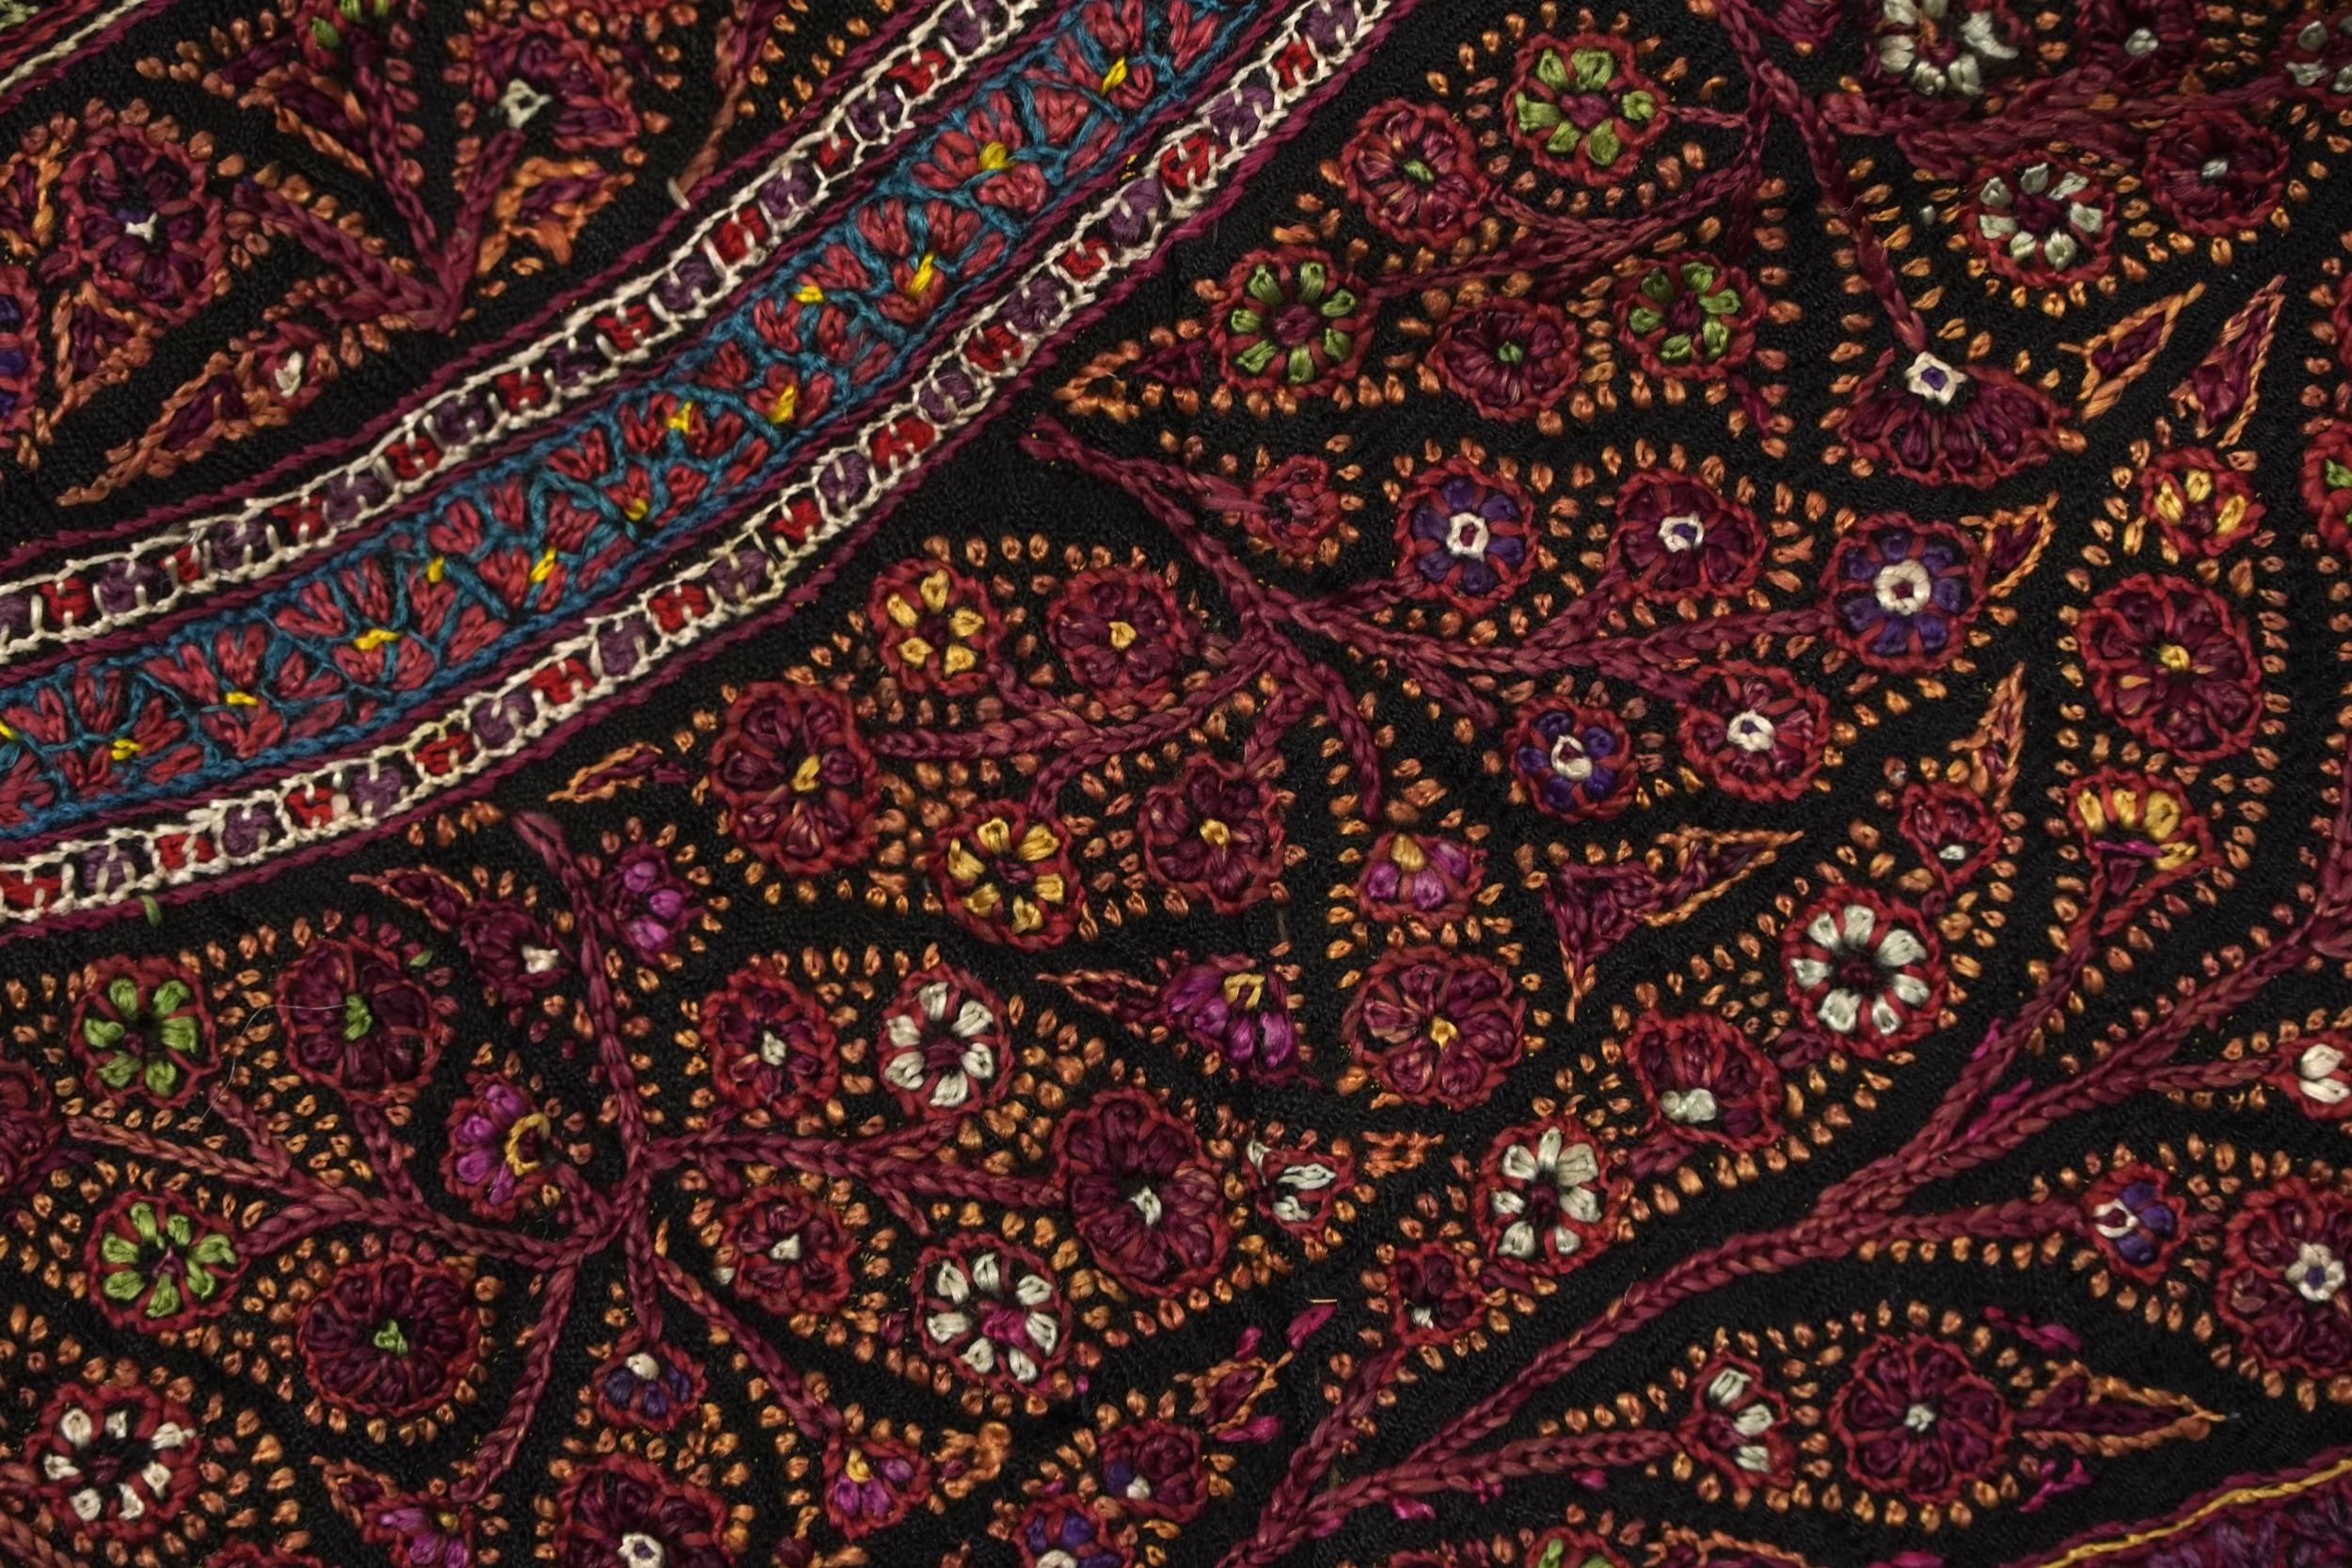 19th century Indian Kashmir/cashmere textile or shawl, 170cm x 170cm : For further information on - Image 7 of 12